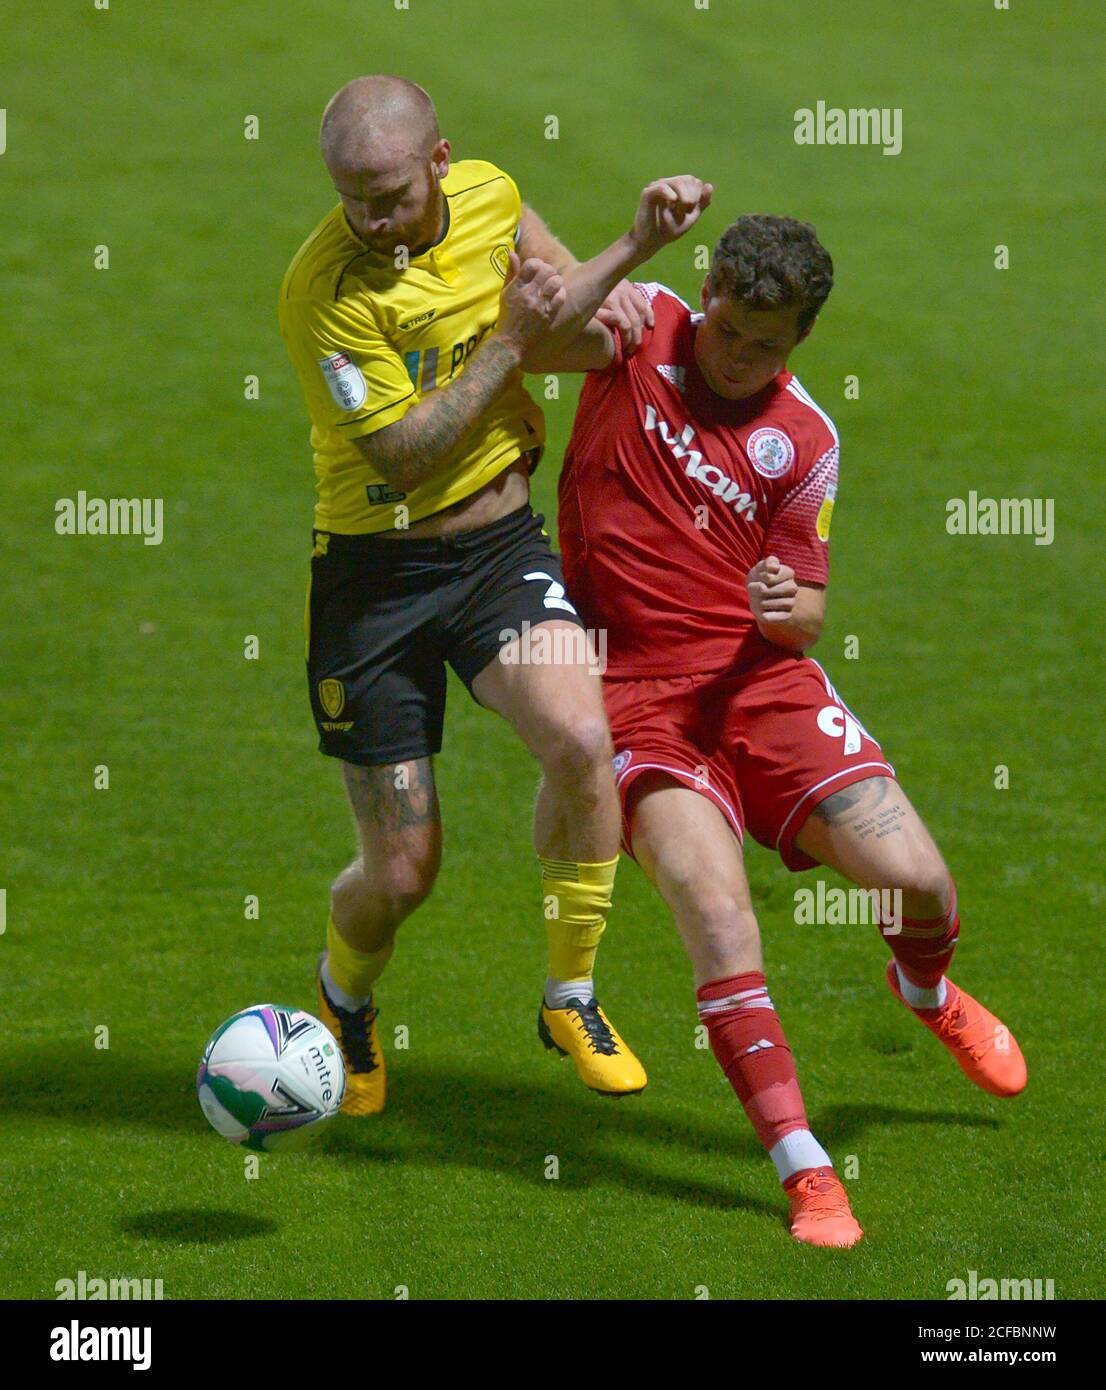 Burton Albion's John Brayford (left) and Accrington Stanley's Ryan Cassidy battle for the ball during the Carabao Cup first round match at the Pirelli Stadium, Burton upon Trent. Stock Photo